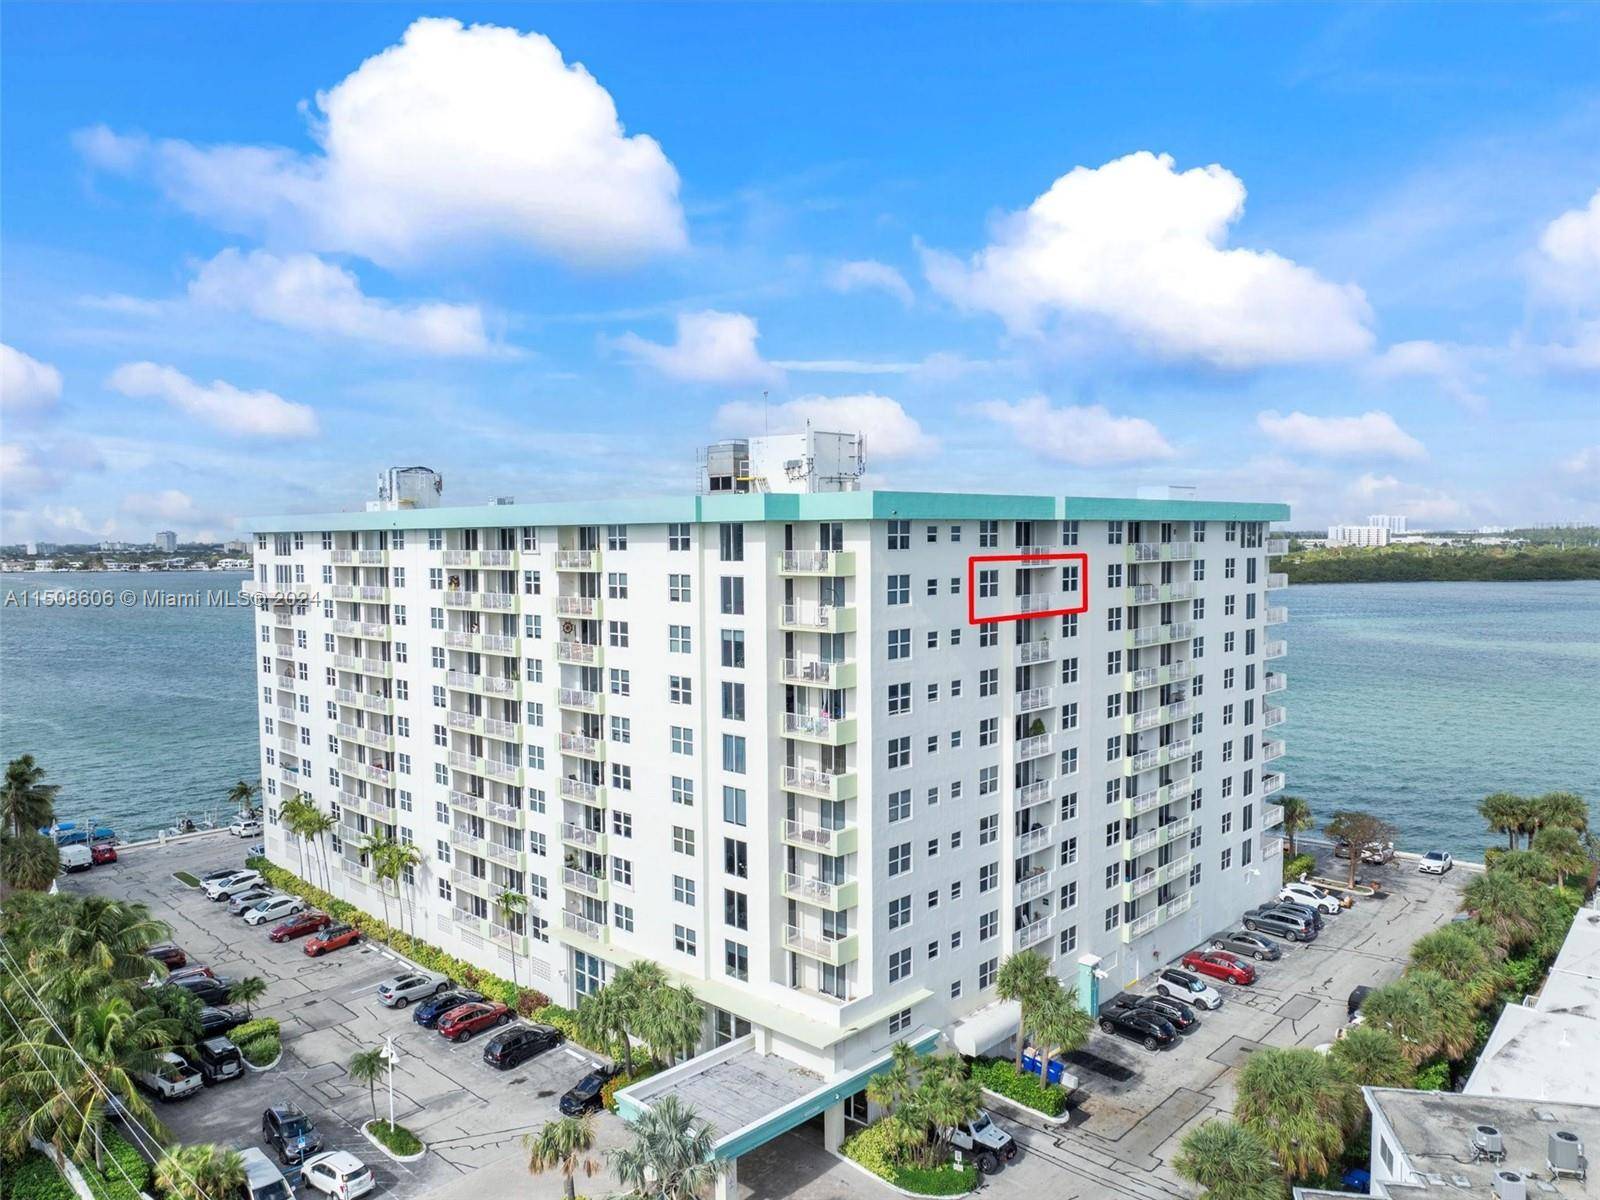 Welcome to Island Pointe, one of the most in demand waterfront buildings in Bay Harbor Island's !